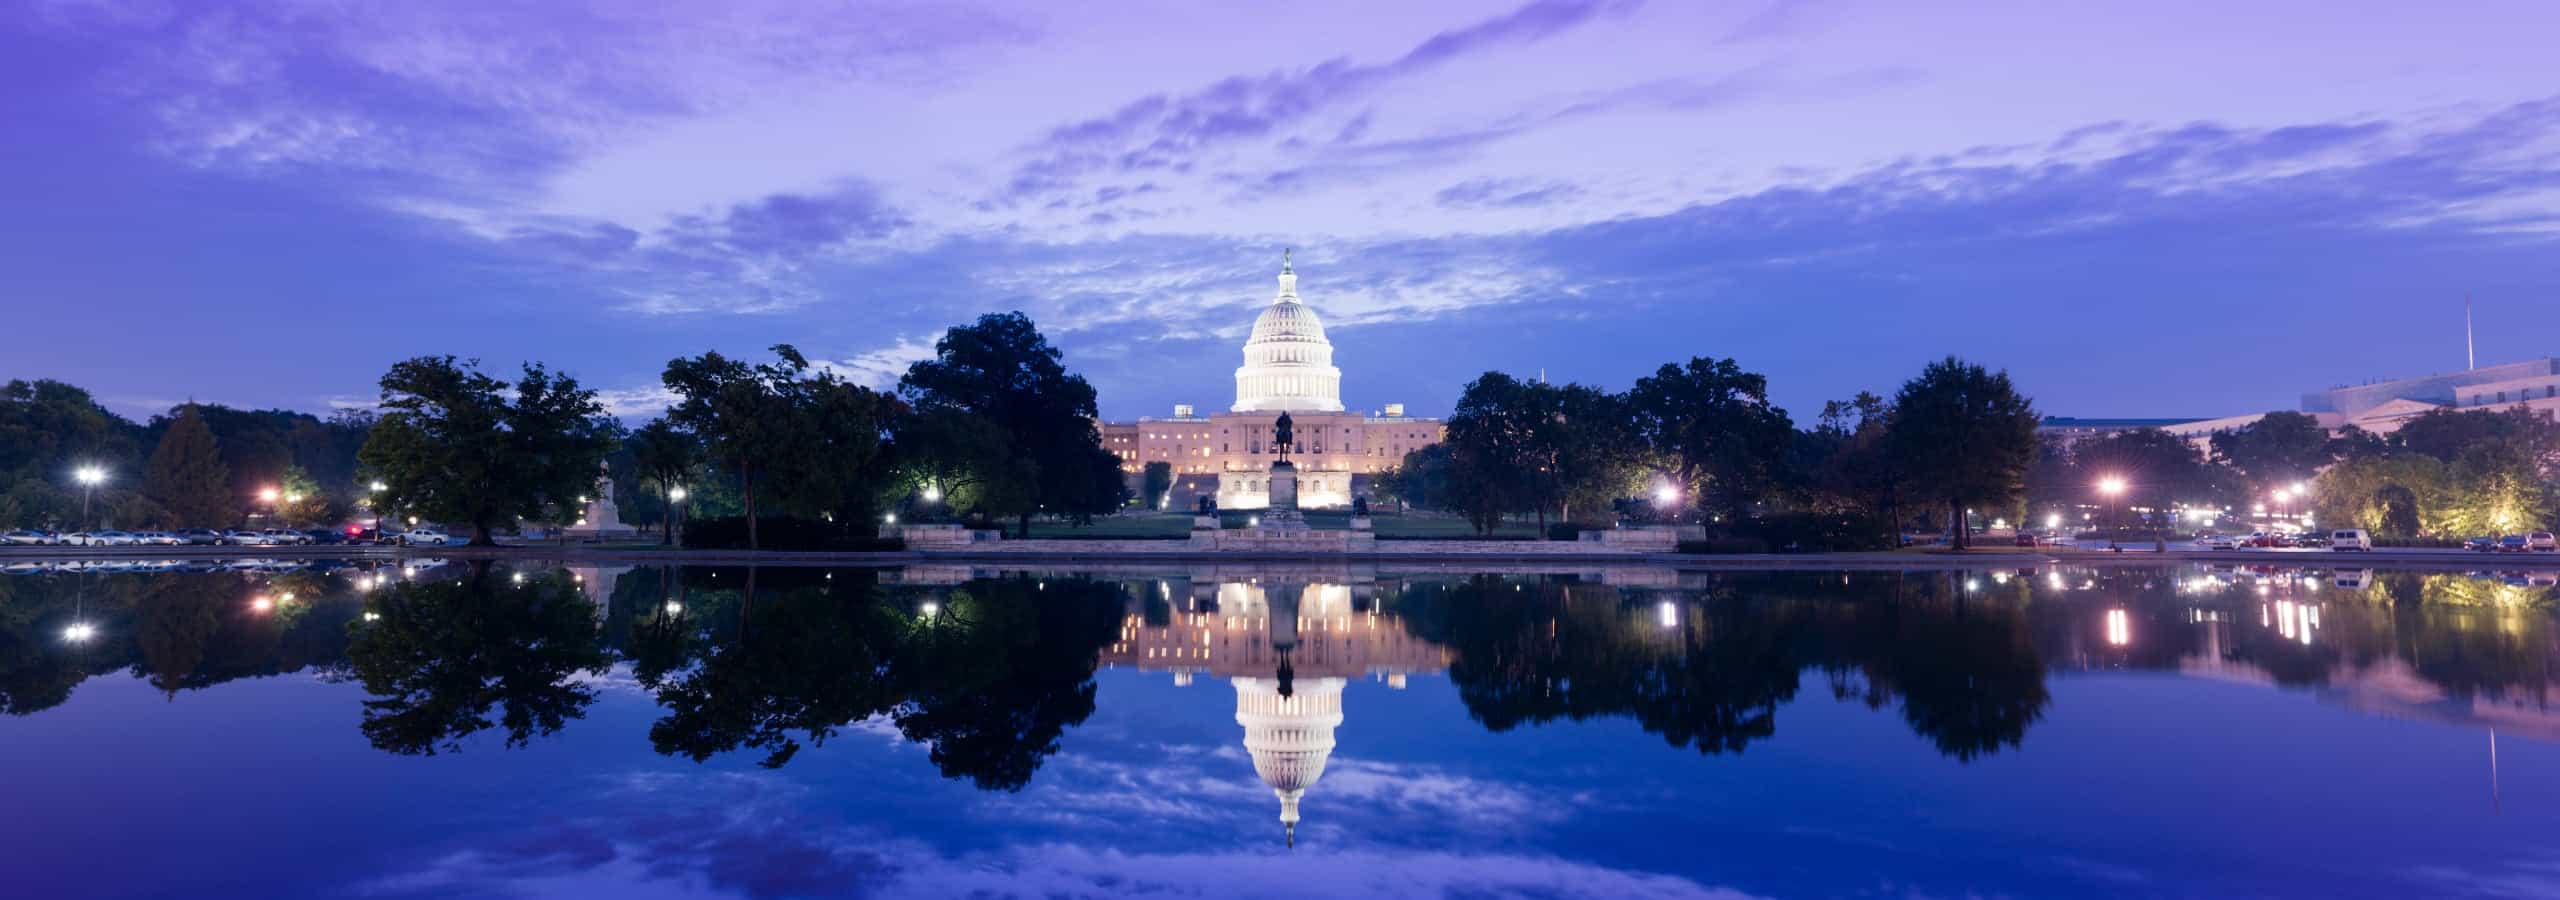 Picture of the Capital Building in Washington, D.C.